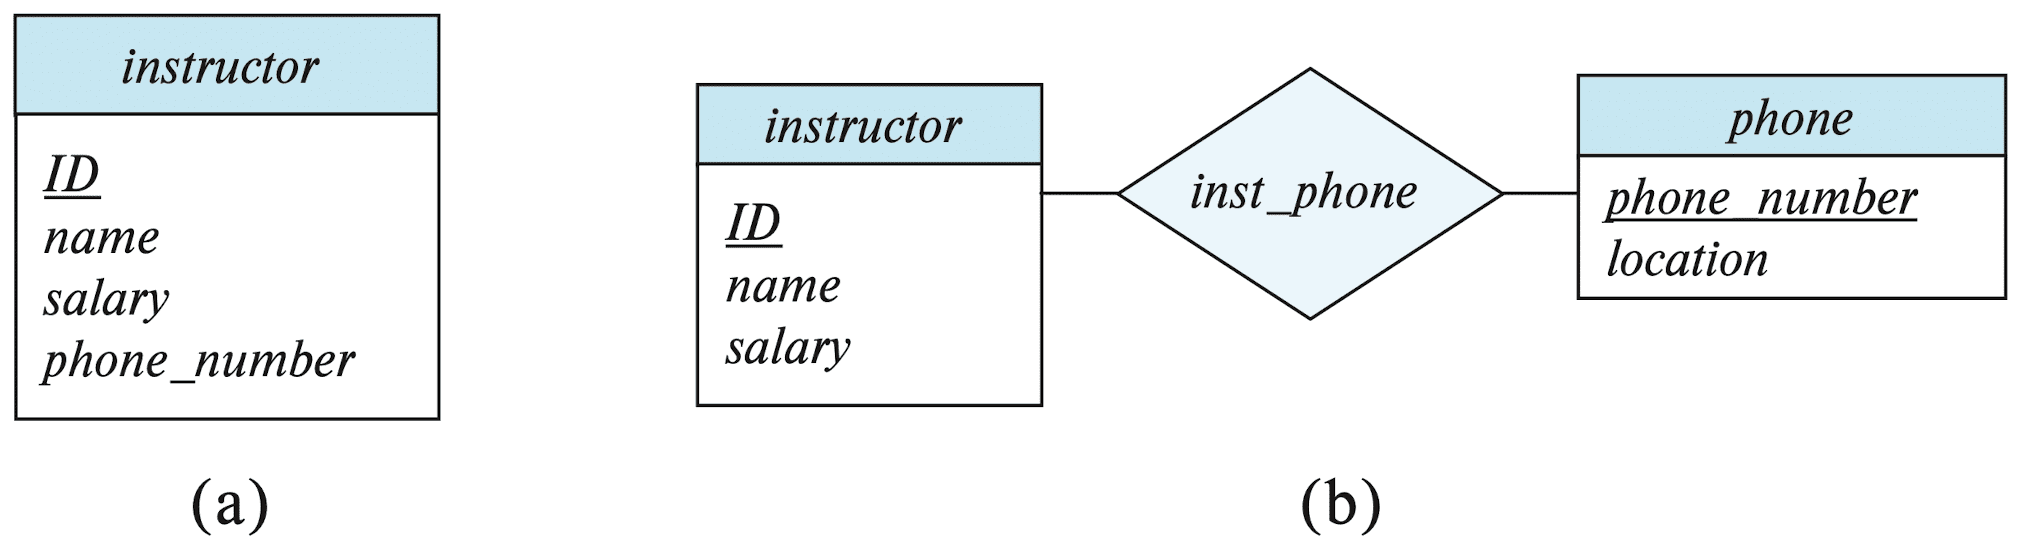 Alternatives for adding phone to the instructor entity set